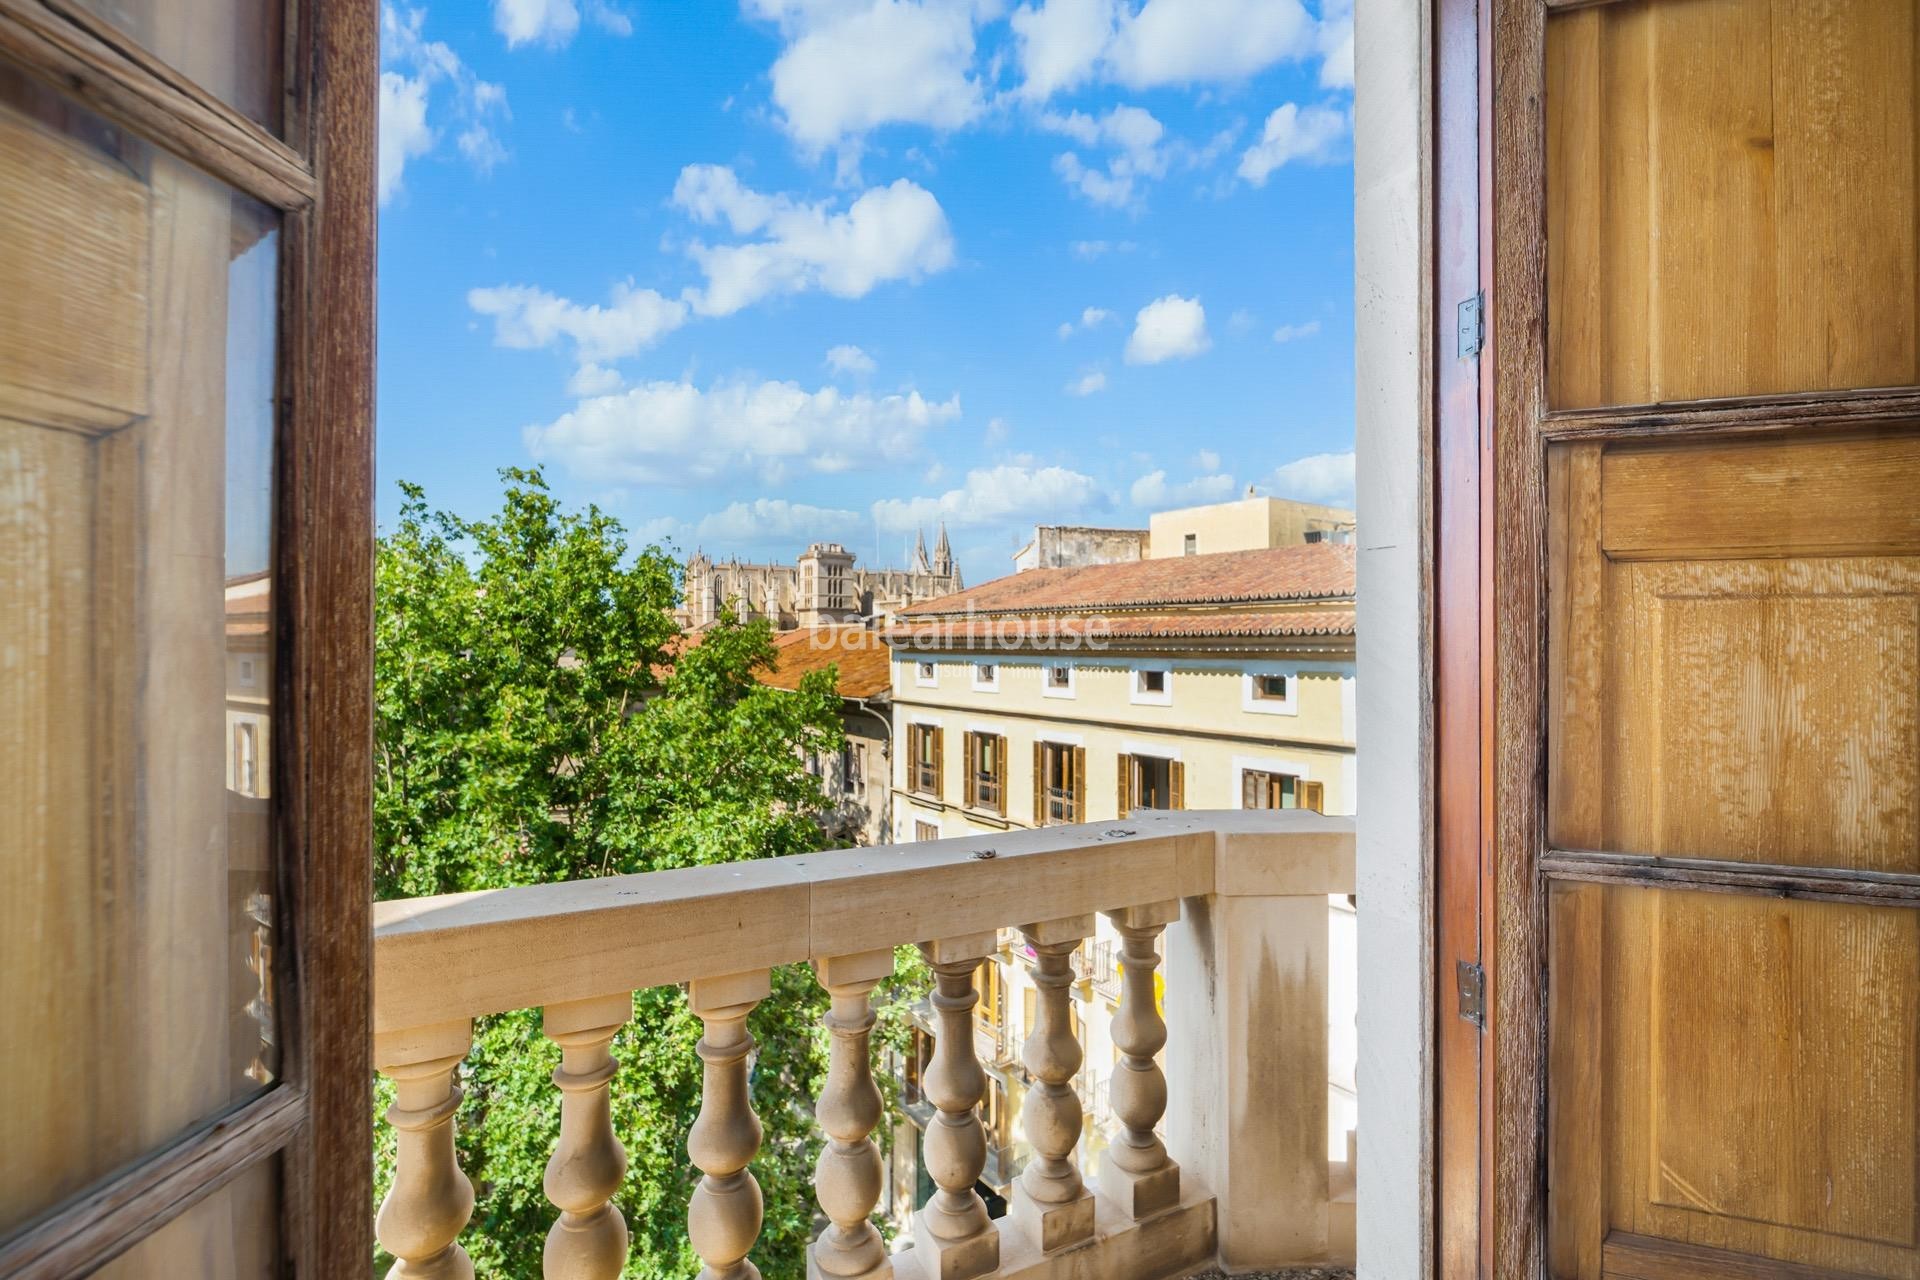 Excellent building for sale in the historic centre of Palma with fabulous views over the whole city